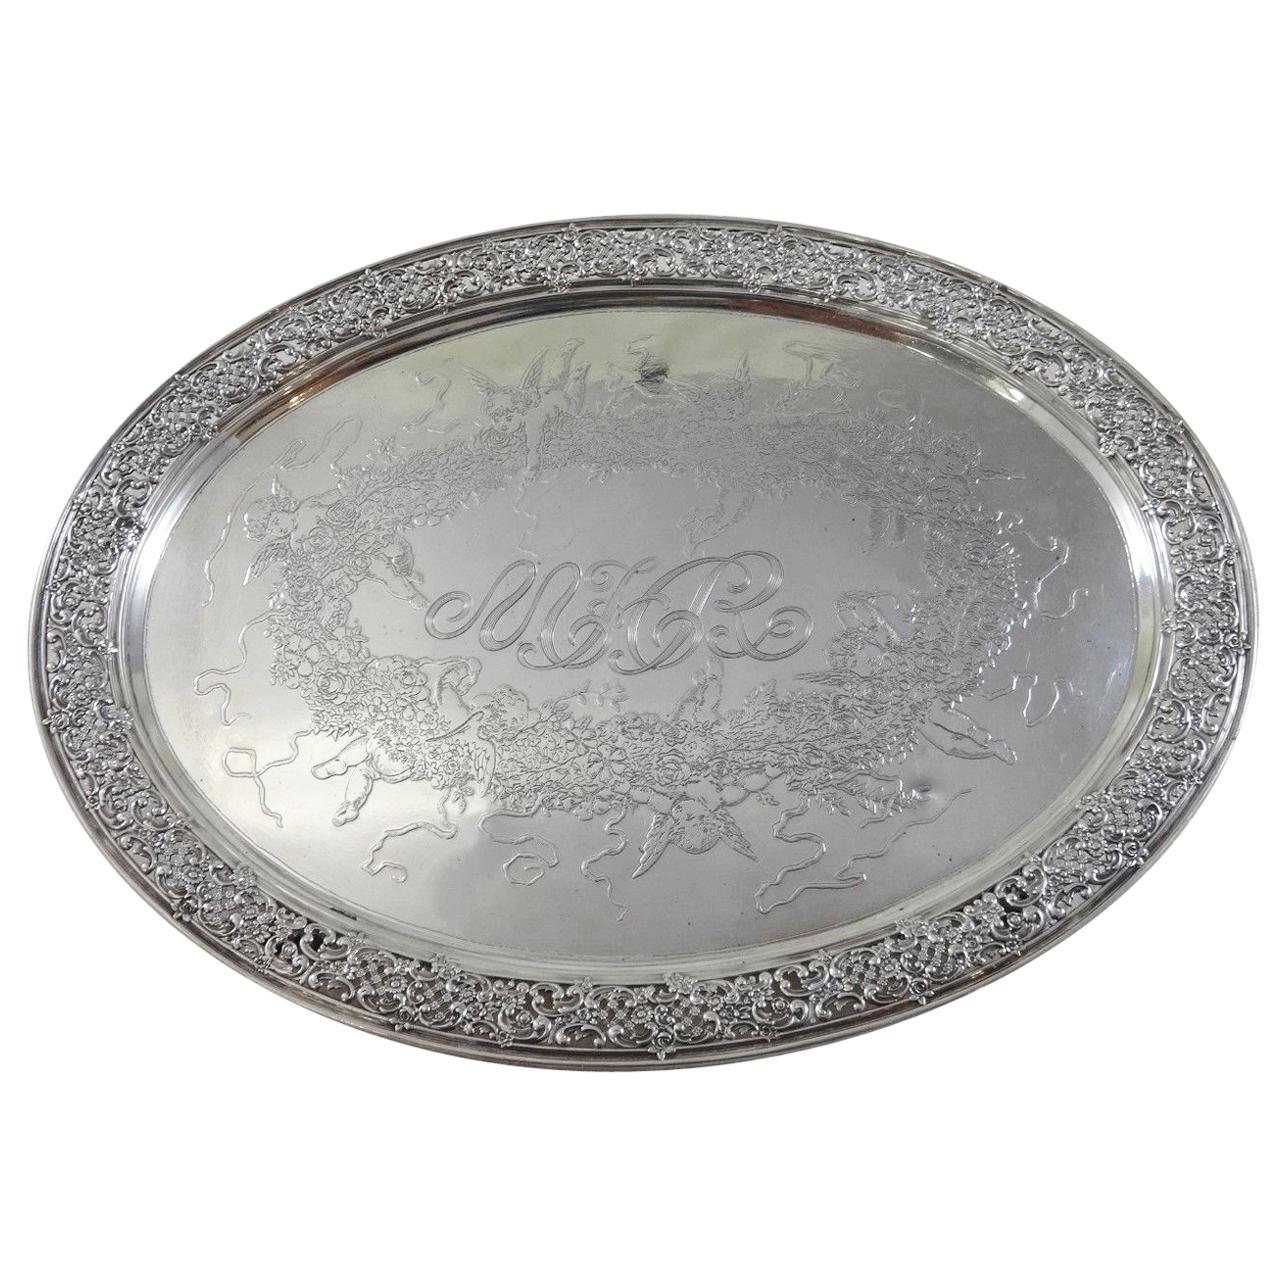 Tiffany & Co. Sterling Silver Tray Footed with Acid Etched Cherubs